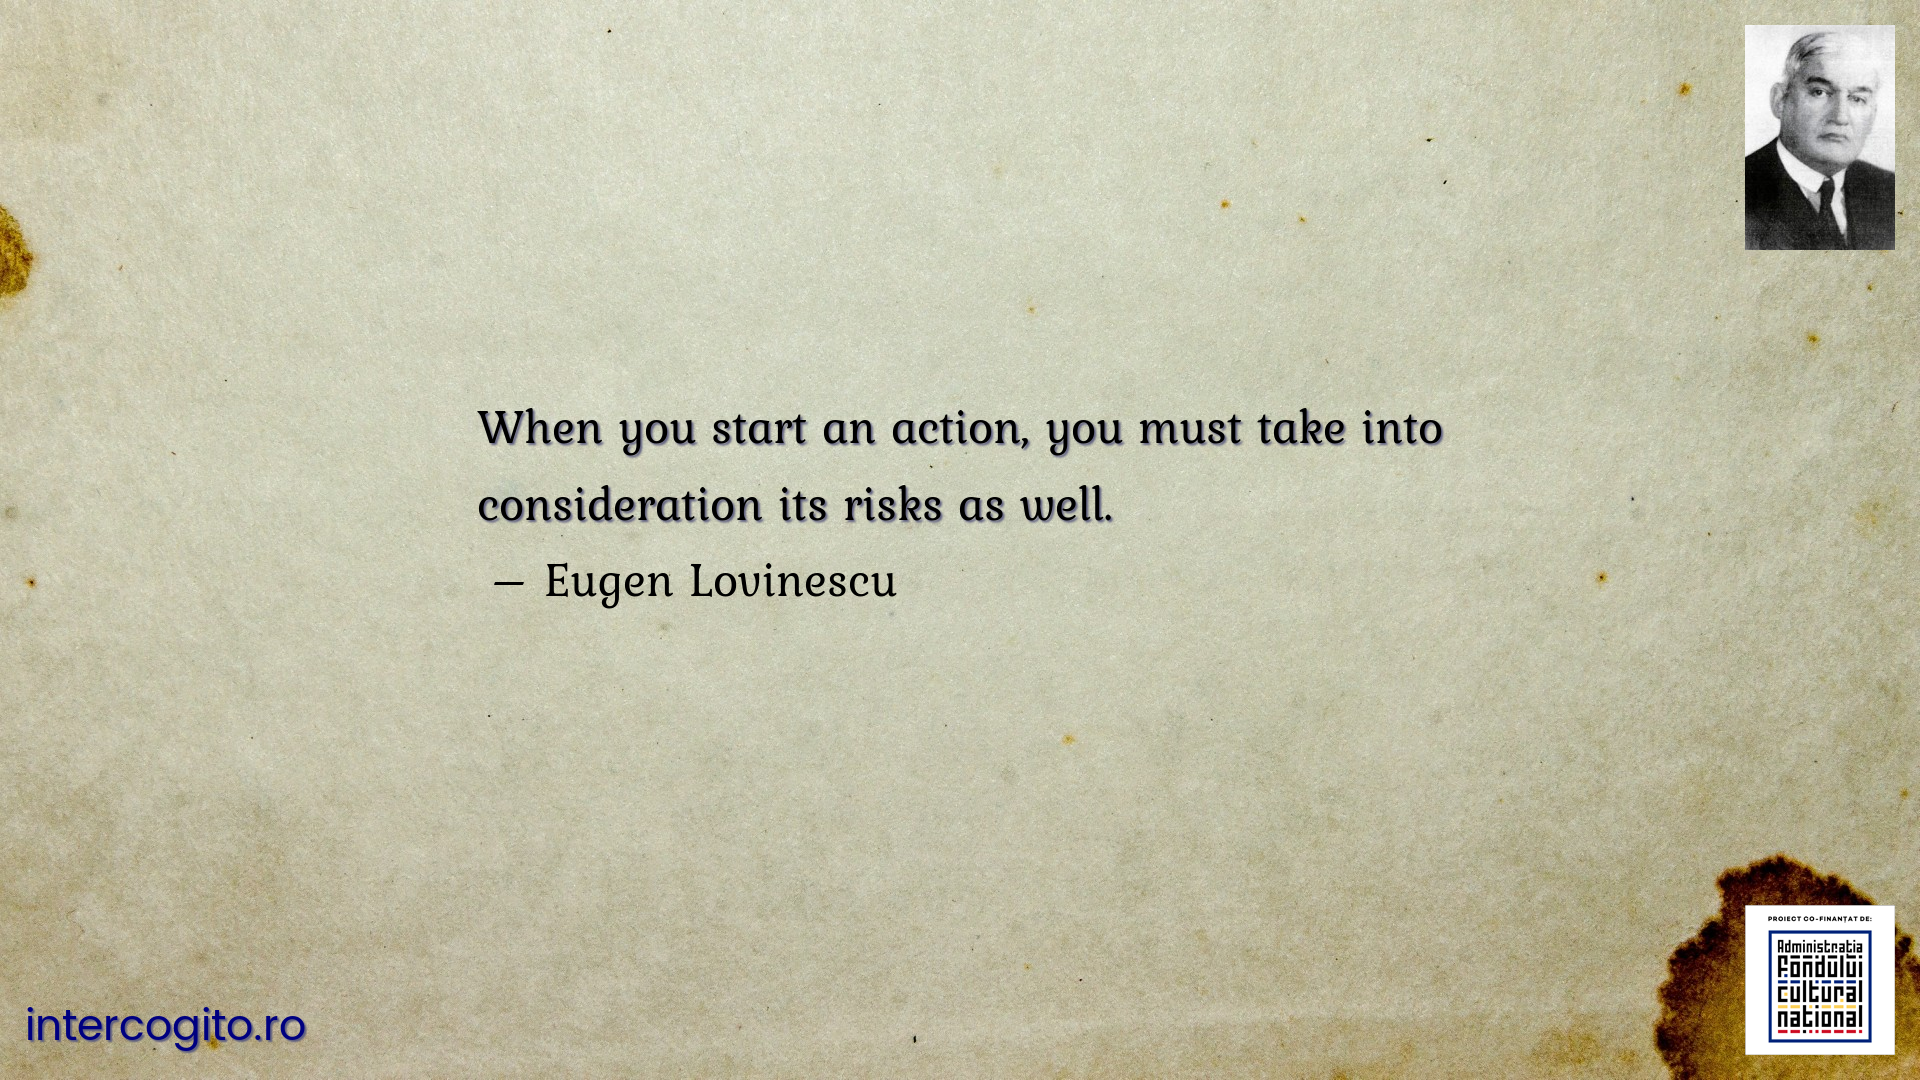 When you start an action, you must take into consideration its risks as well.